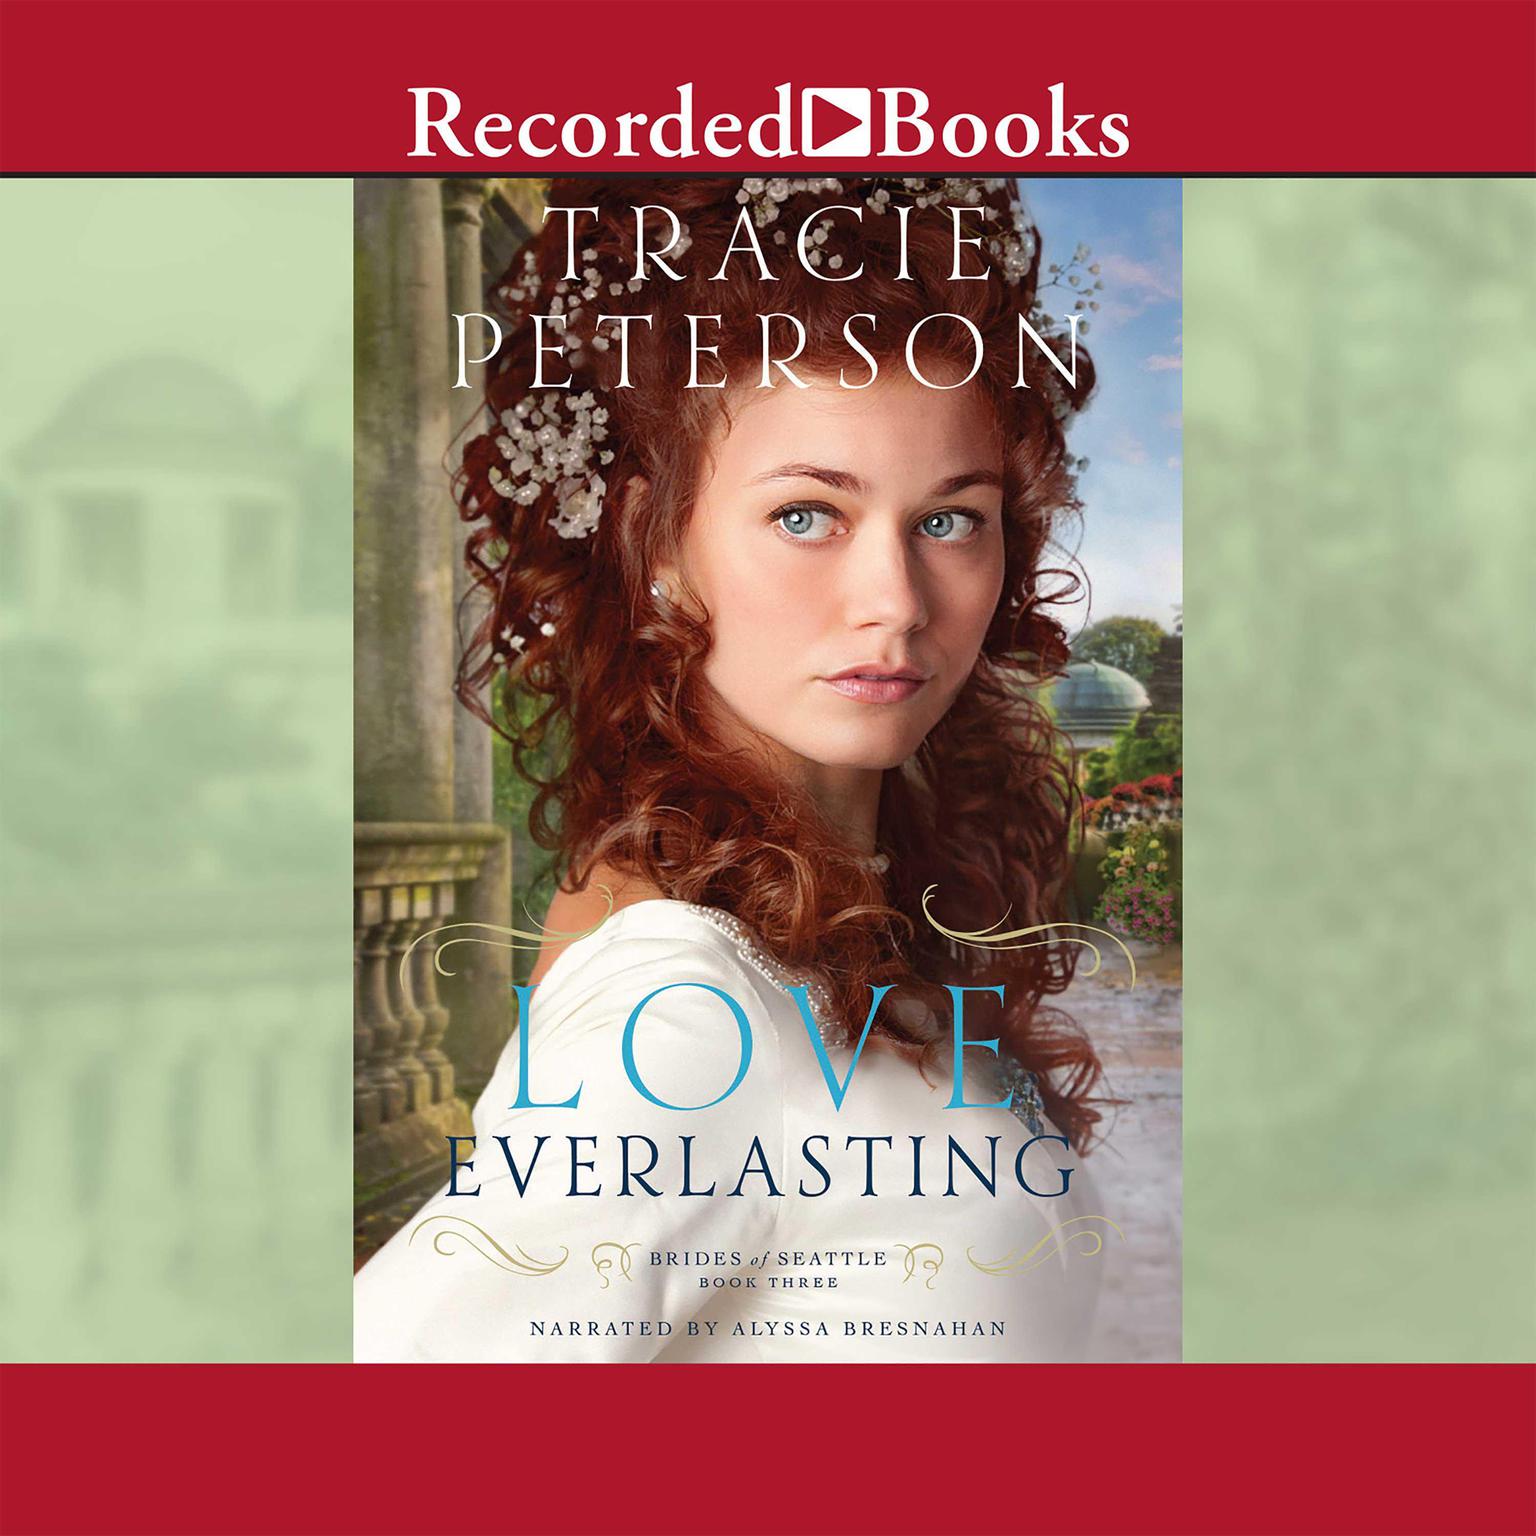 Love Everlasting Audiobook, by Tracie Peterson